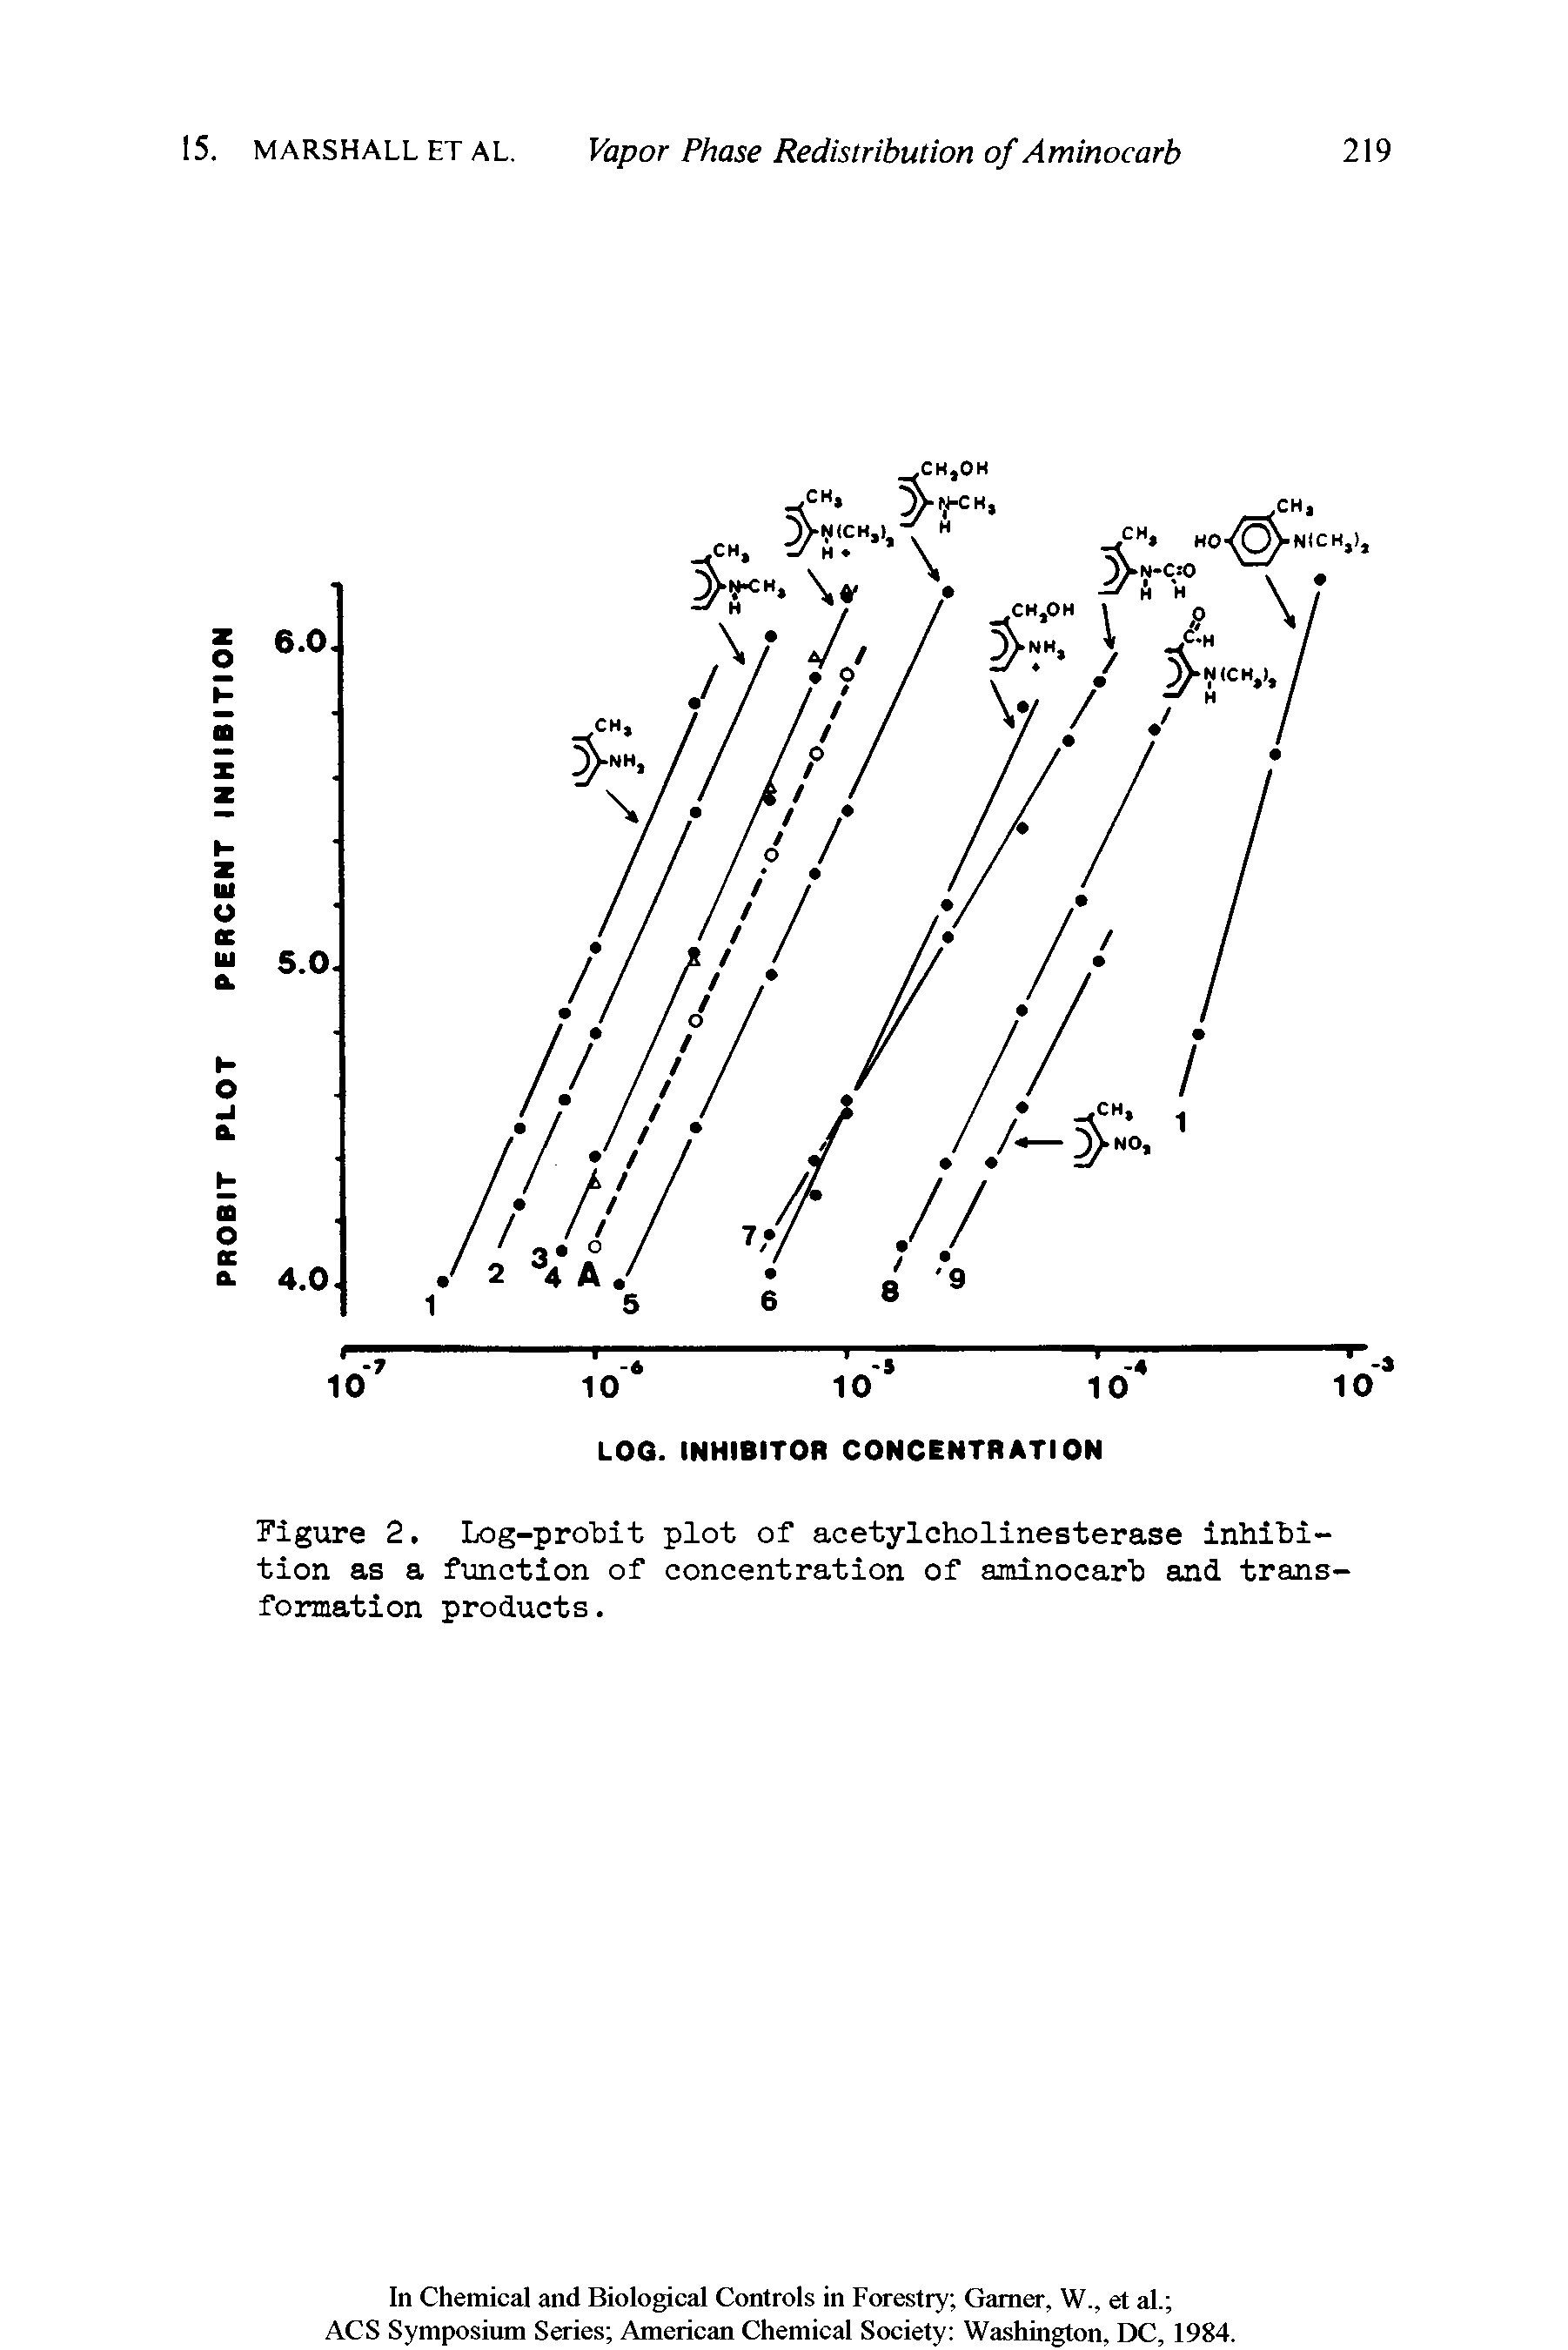 Figure 2. Log-probit plot of acetylcholinesterase inhibition as a function of concentration of aminocarb and transformation products.